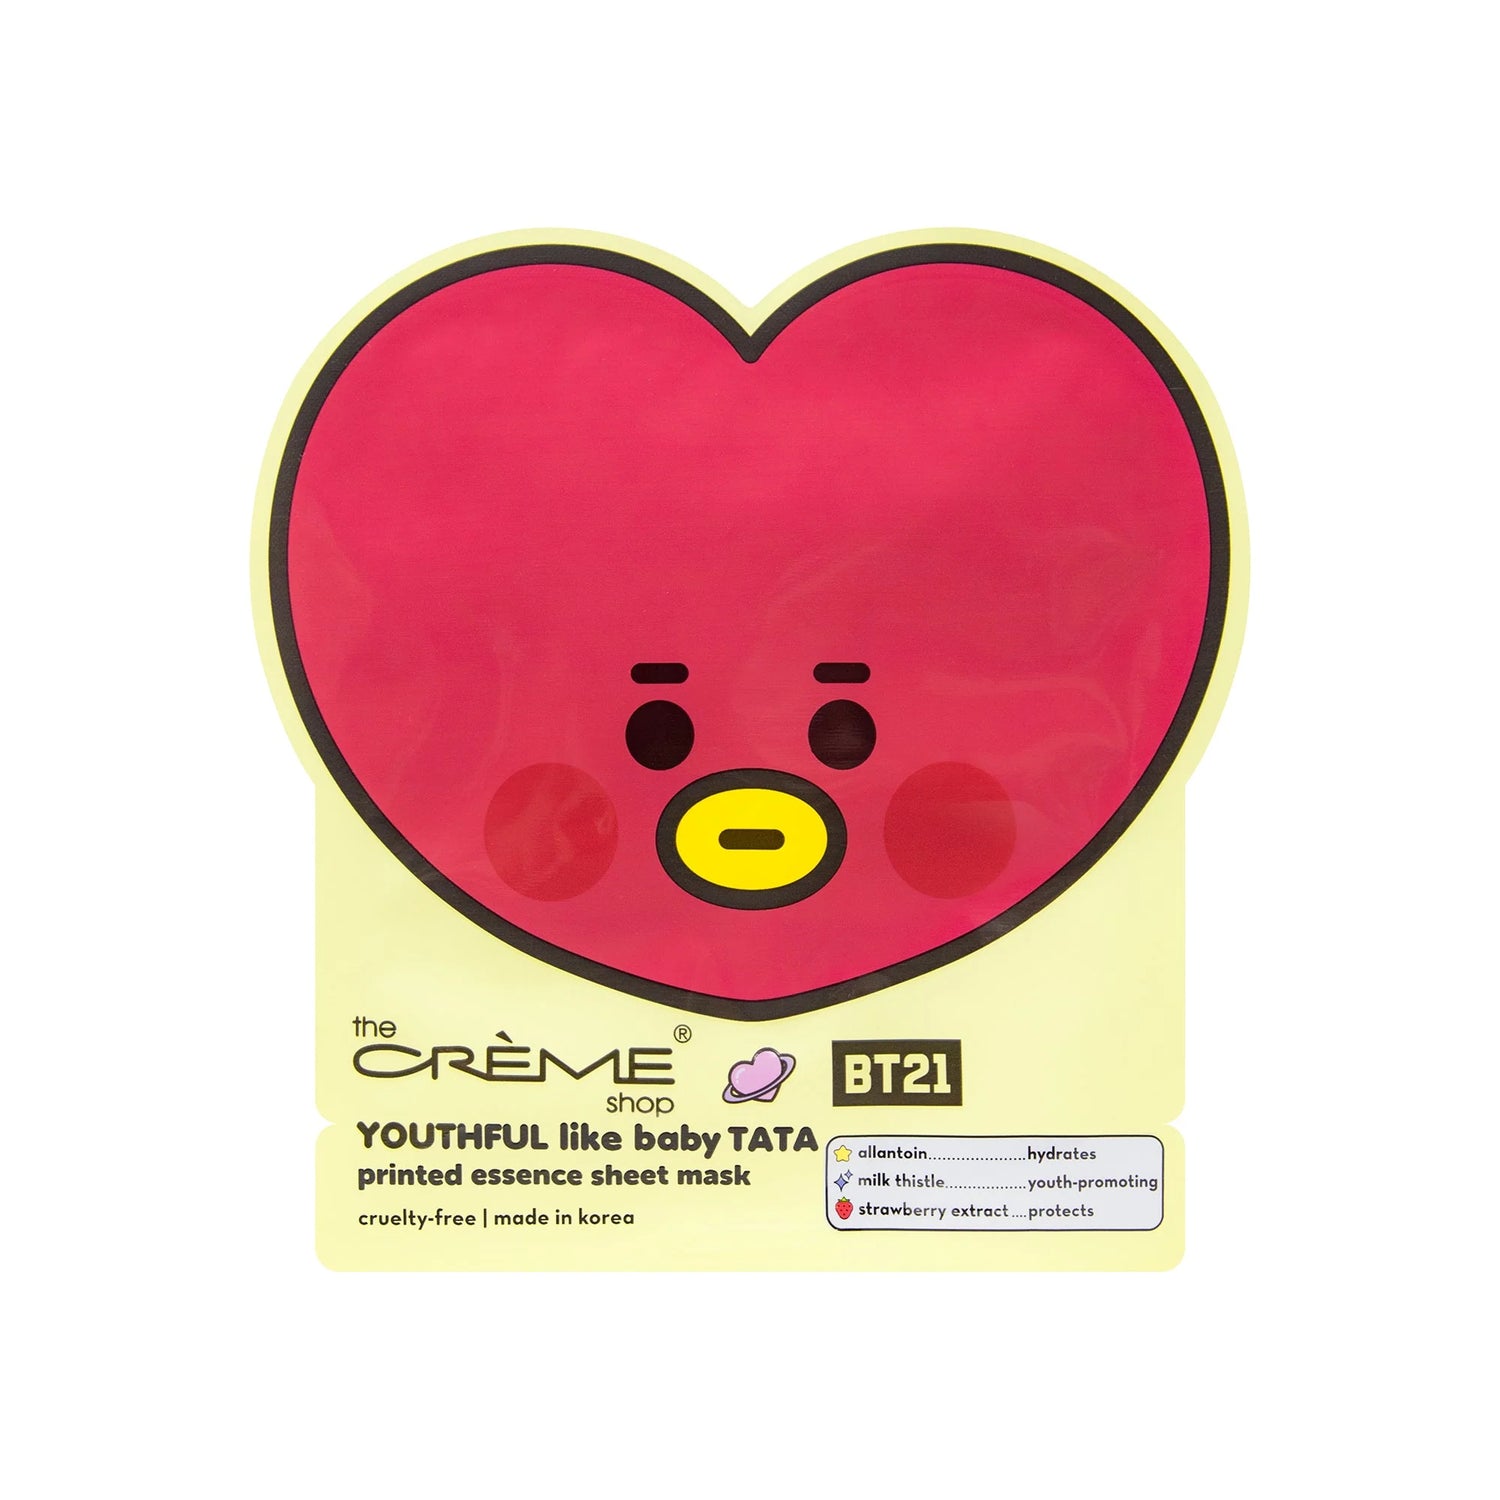 The Crème Shop x BT21 YOUTHFUL Like Baby TATA Printed Essence Sheet Mask (Allantoin, Milk Thistle, Strawberry Extract) BTS Army Take Two asian authentic genuine original korean skincare montreal toronto calgary canada thekshop thekshop.ca natural organic vegan cruelty-free cosmetics kbeauty vancouver free shipping clean beauty routine skin makeup kpop 